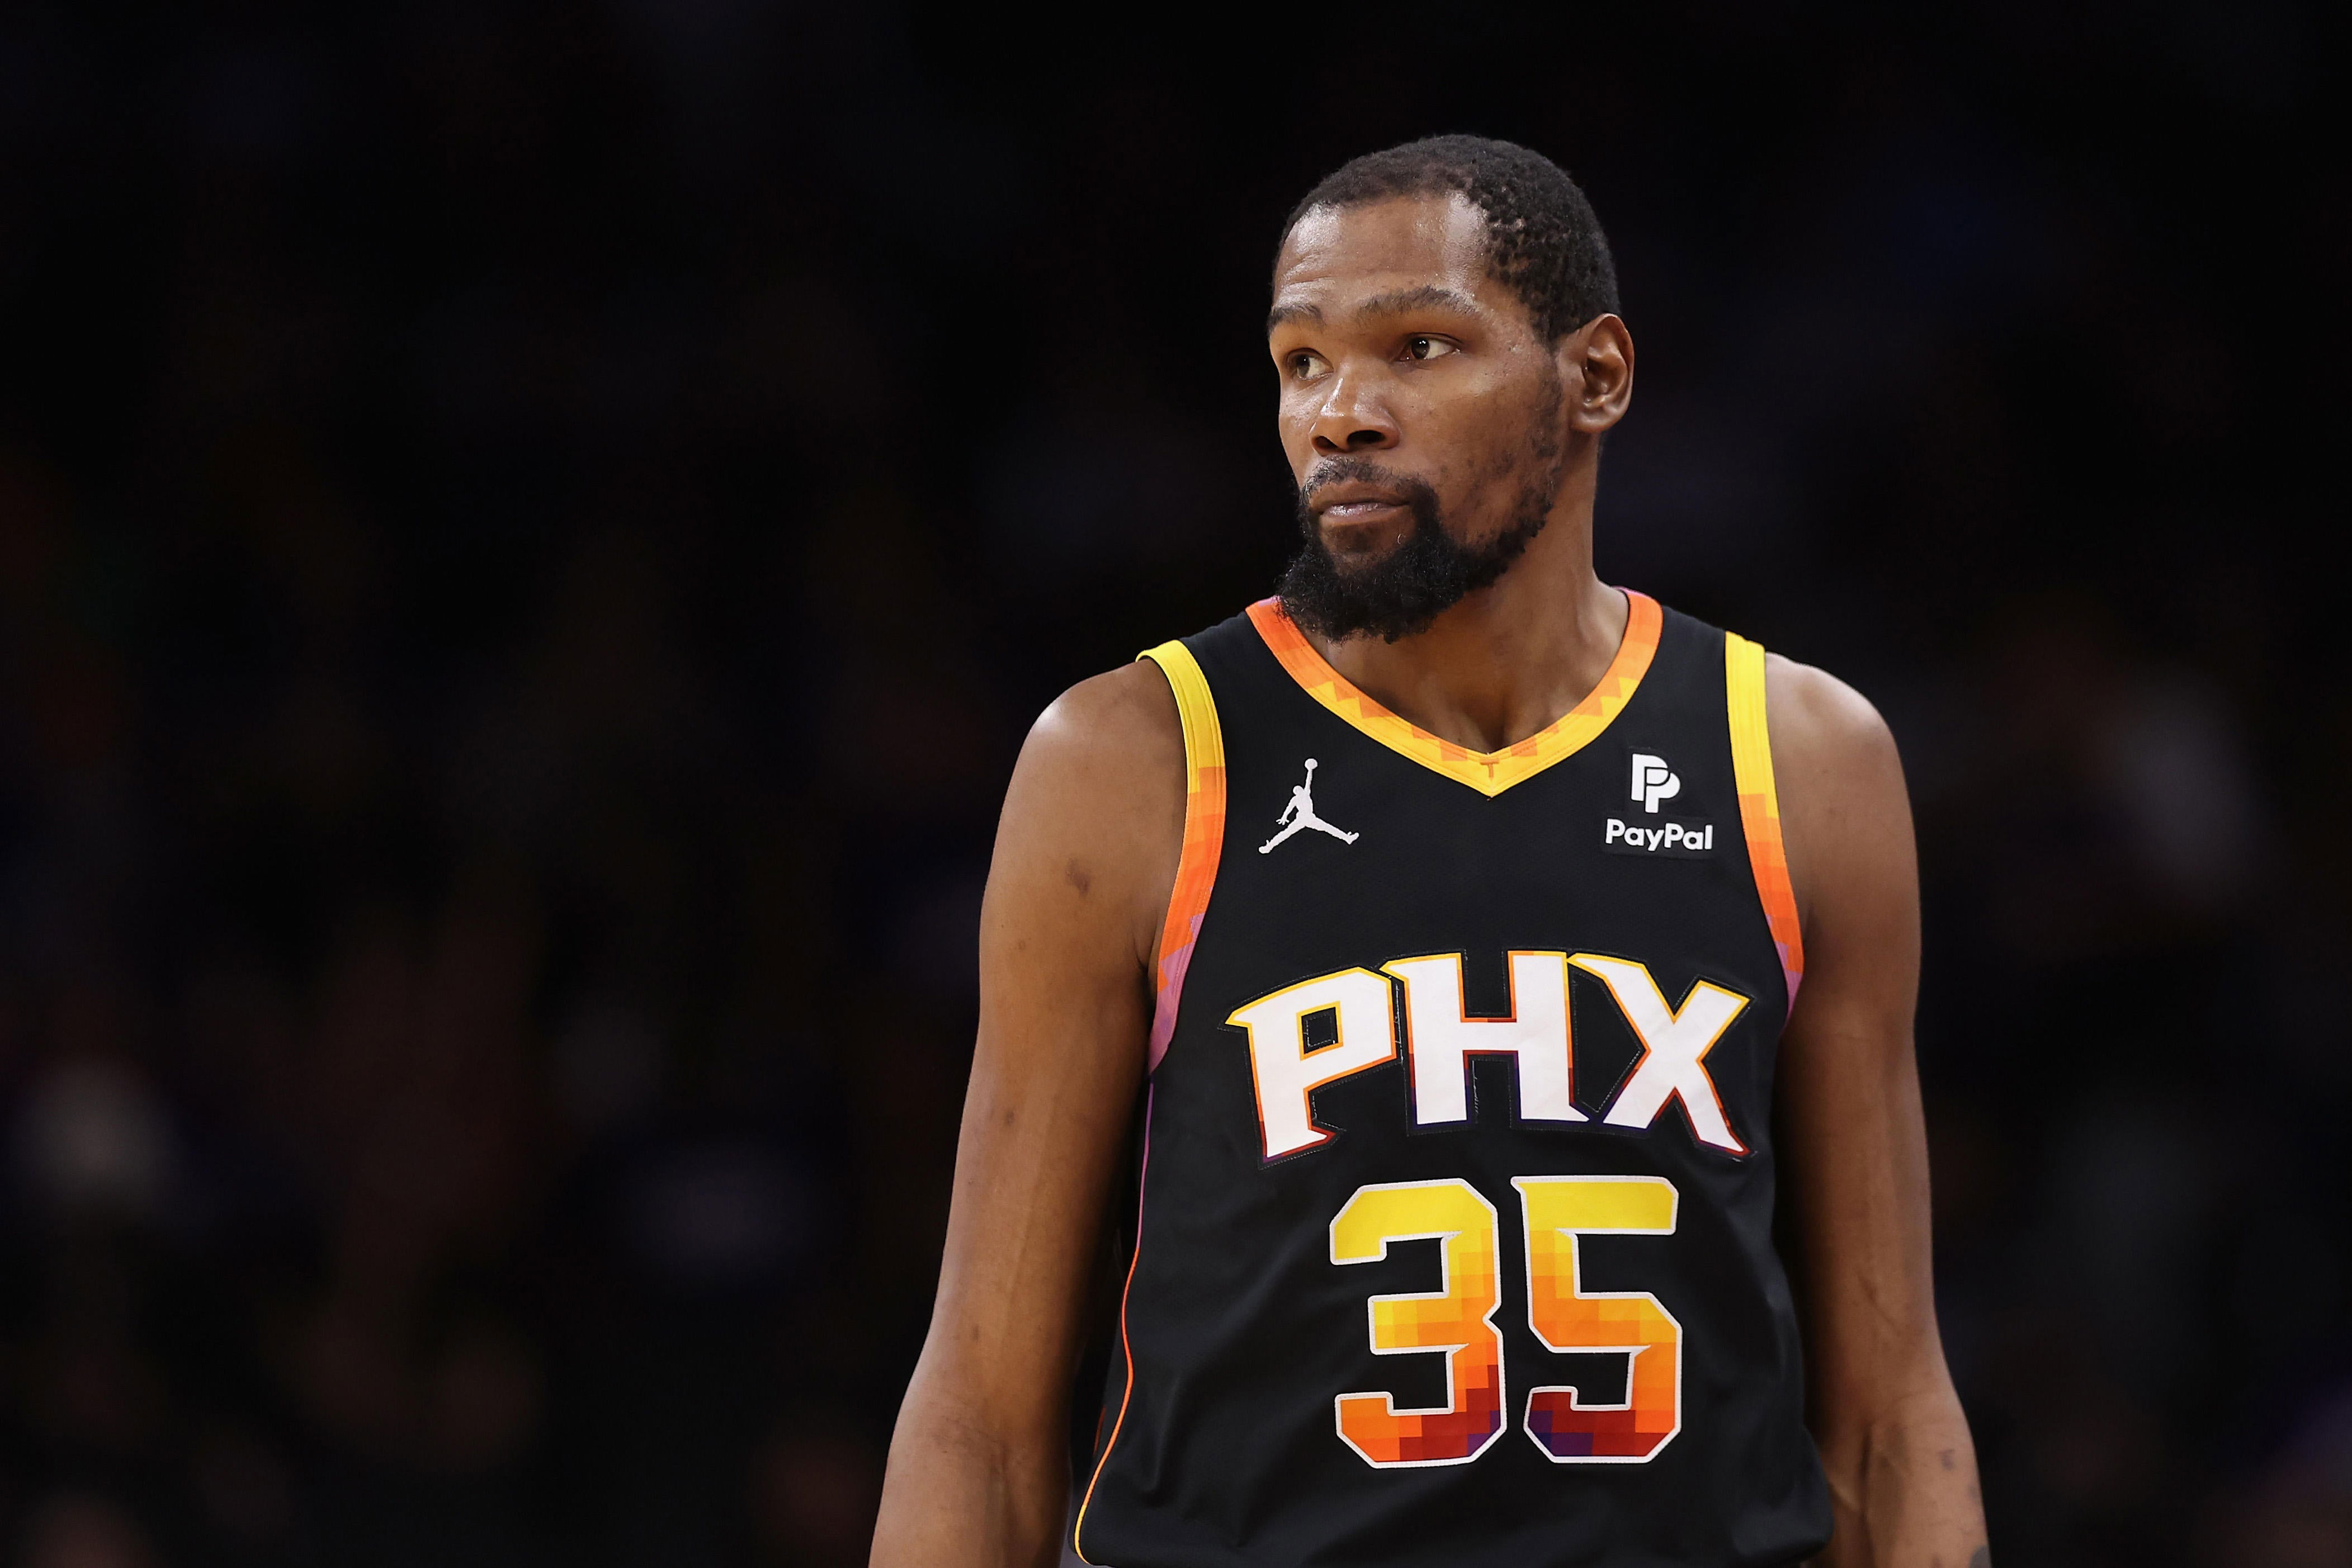 kevin durant wasn't comfortable with his role in phoenix this season, per report